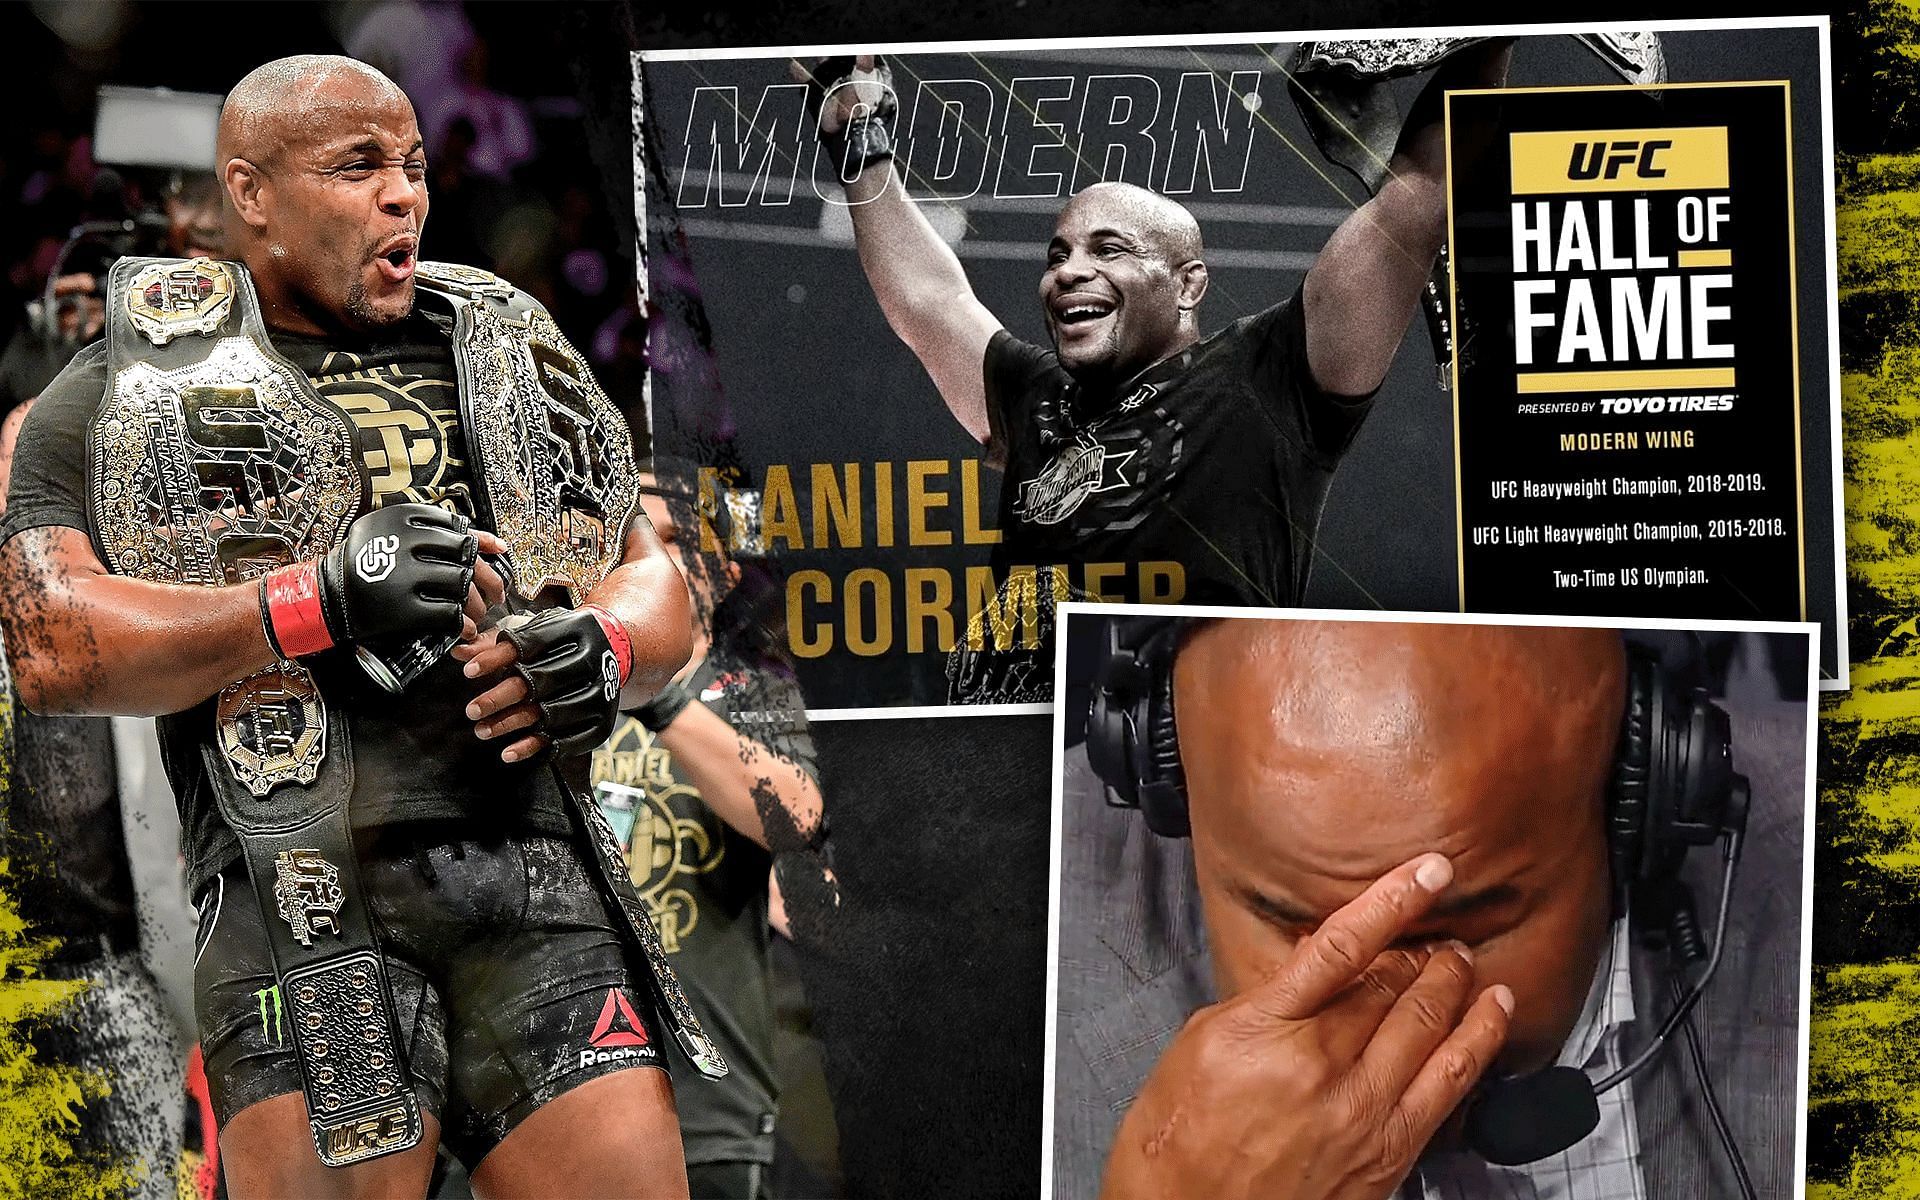 Daniel Cormier got emotional as the UFC announced his induction into the Hall of Fame [Images via @UFC and @UFCEurope on Instagram]